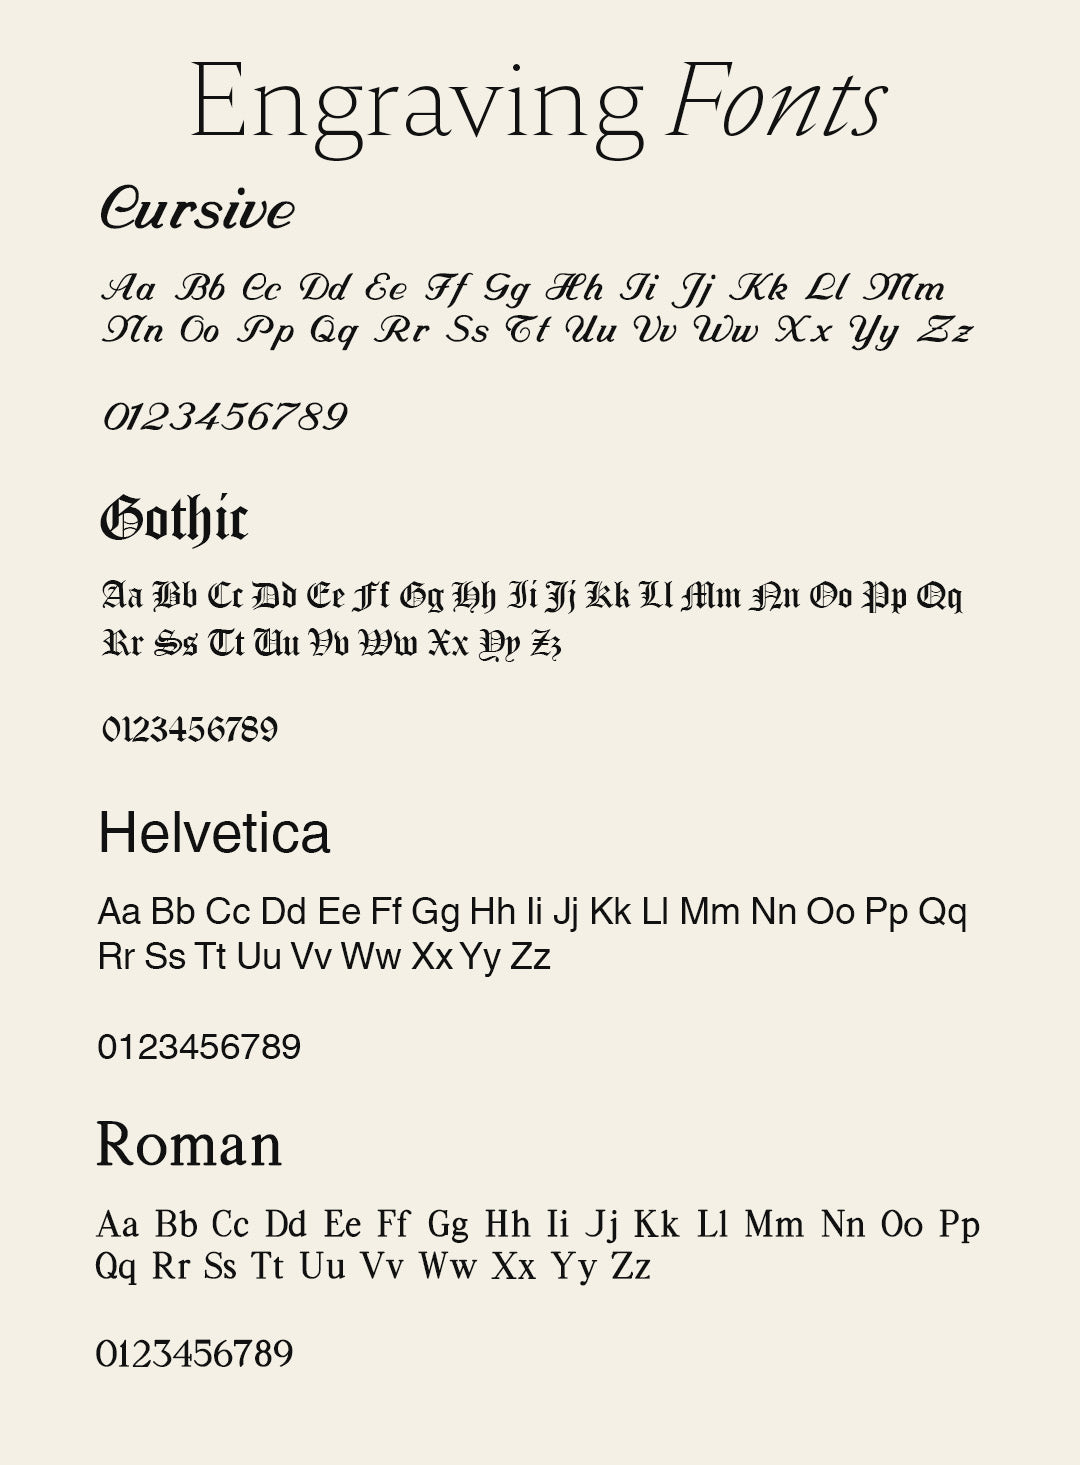 A visual chart of font options available for engraving on Melanie Auld Jewelry. Options are cursive, gothic, Helvetica and roman